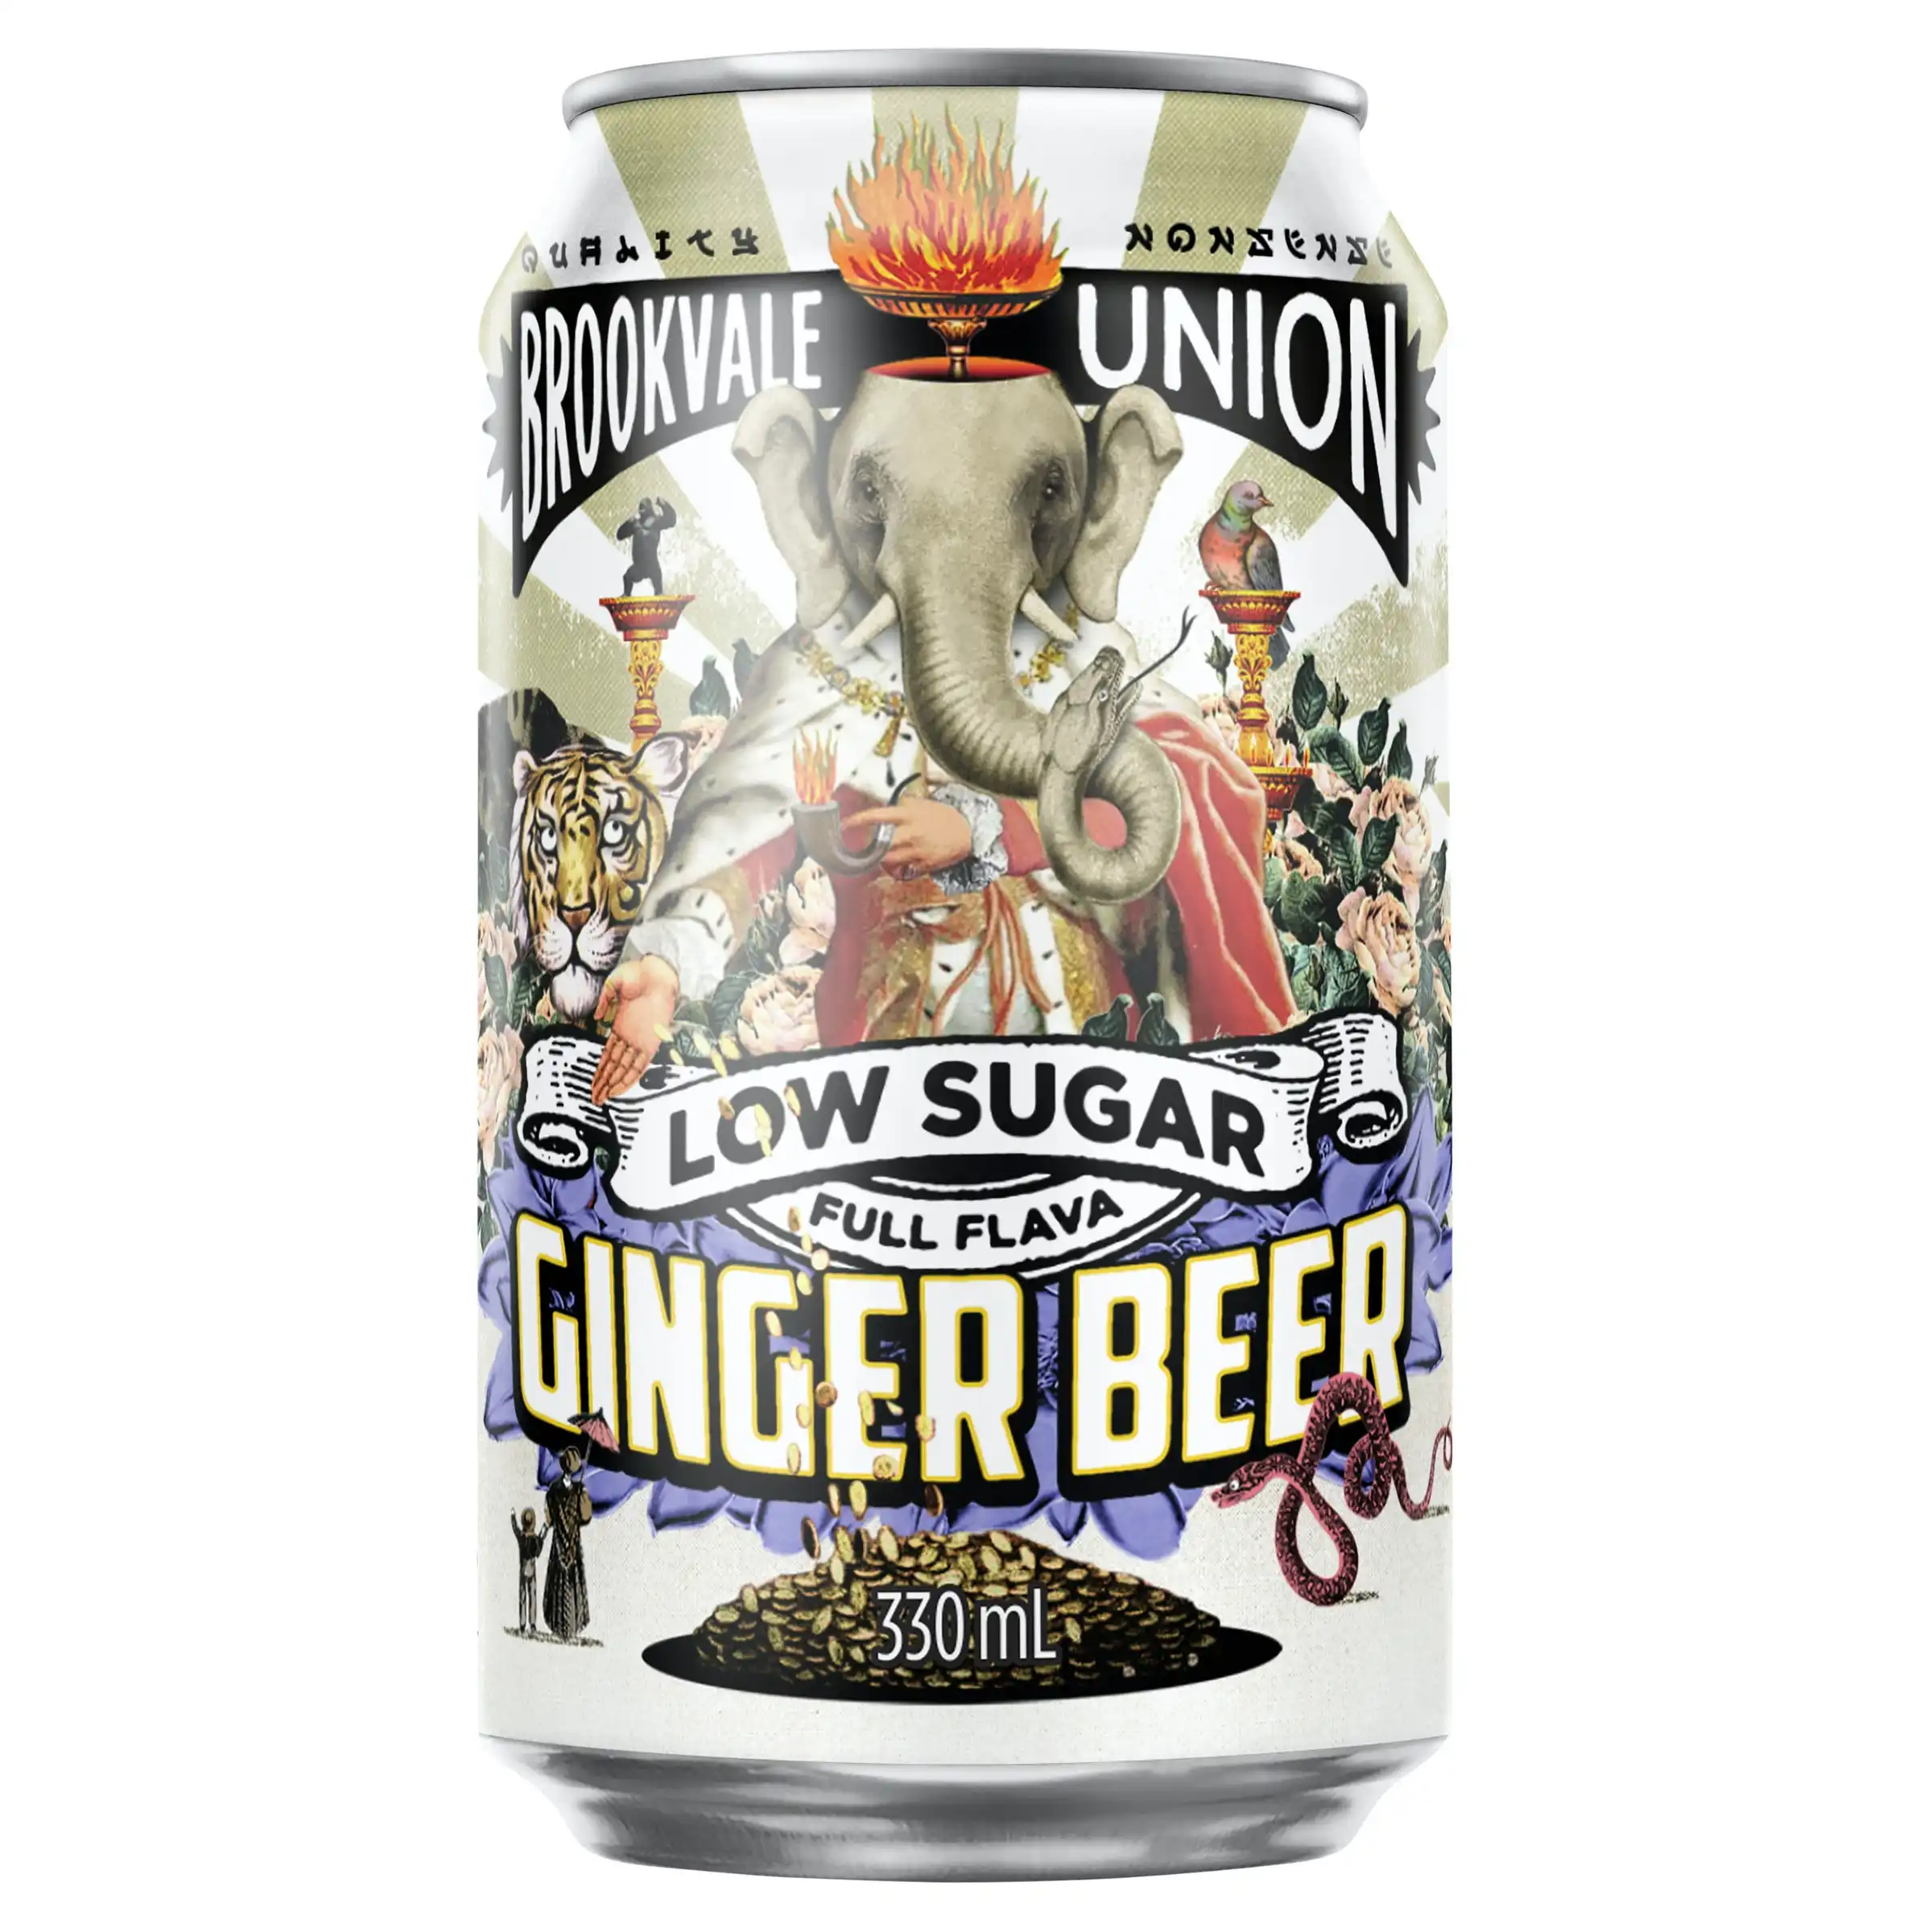 Brookvale Union Ginger Beer Low Sugar 24 x 330ml Cans